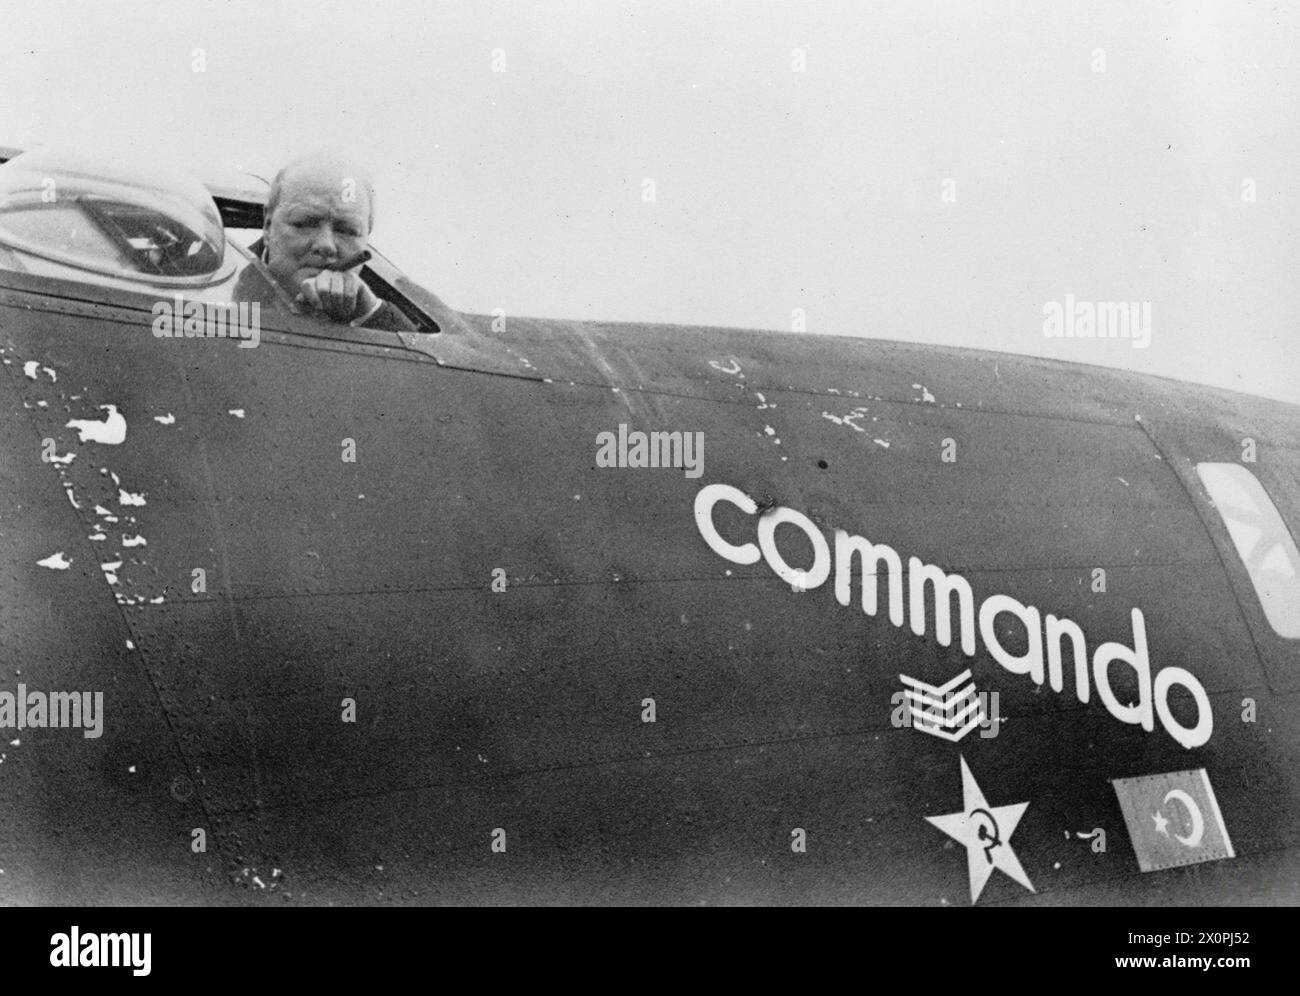 WINSTON CHURCHILL IN TURKEY DURING THE SECOND WORLD WAR - Winston Churchill looks out from his personal aircraft, a Consolidated B-24 Liberator, AL 504 'Commando', shortly before leaving Adana, Turkey, circa 22 April 1943. A black and white copy negative , Stock Photo